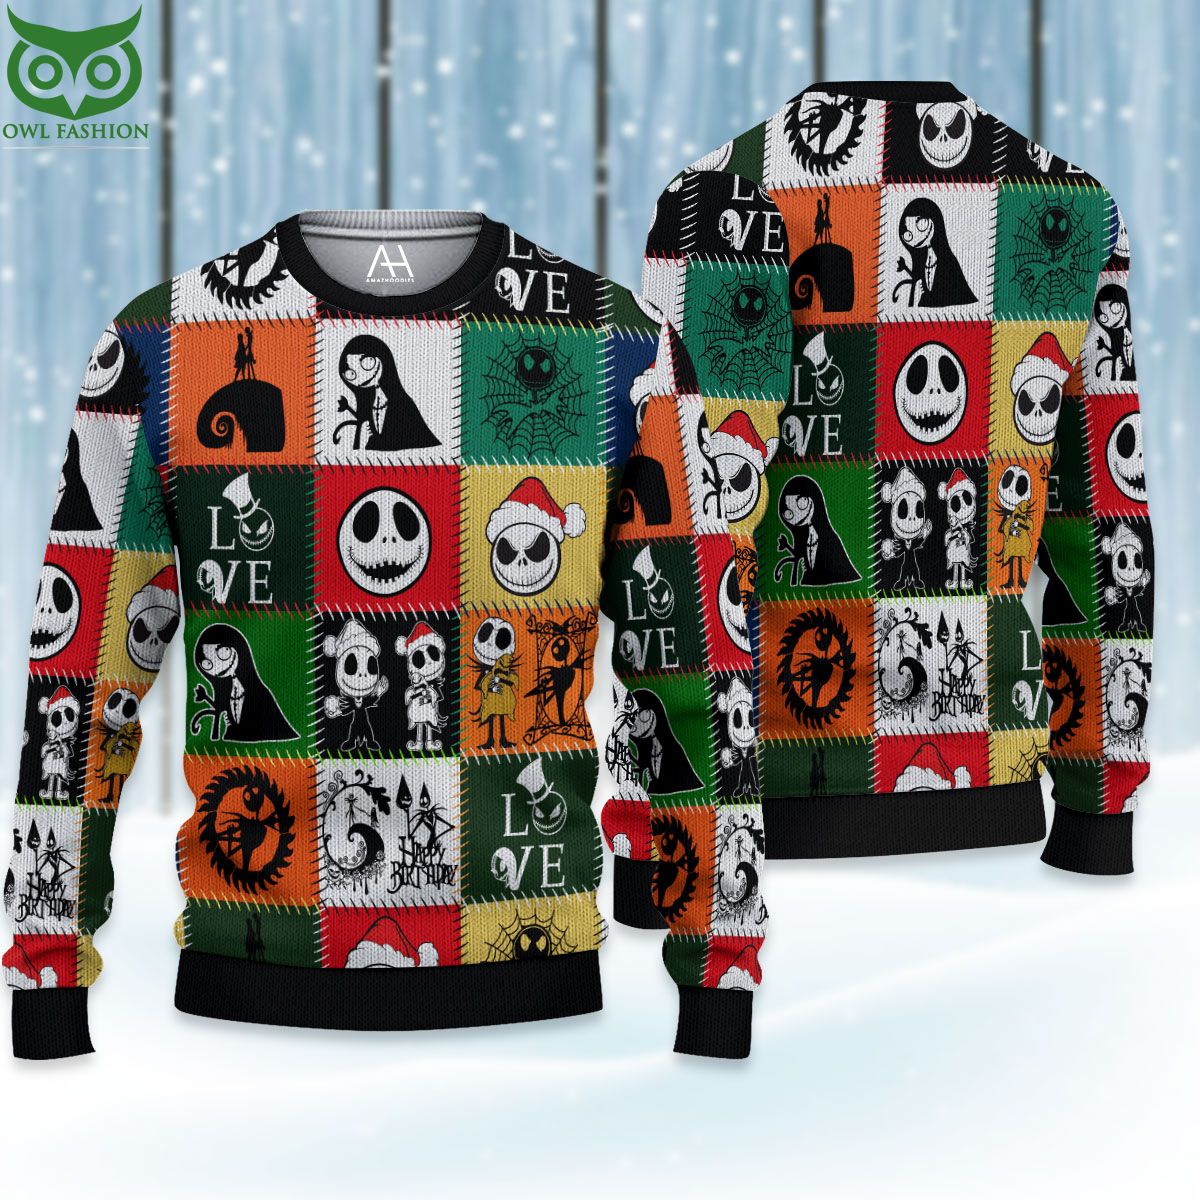 the nightmare before christmas characters special design sweater jumper 1 5JUBZ.jpg